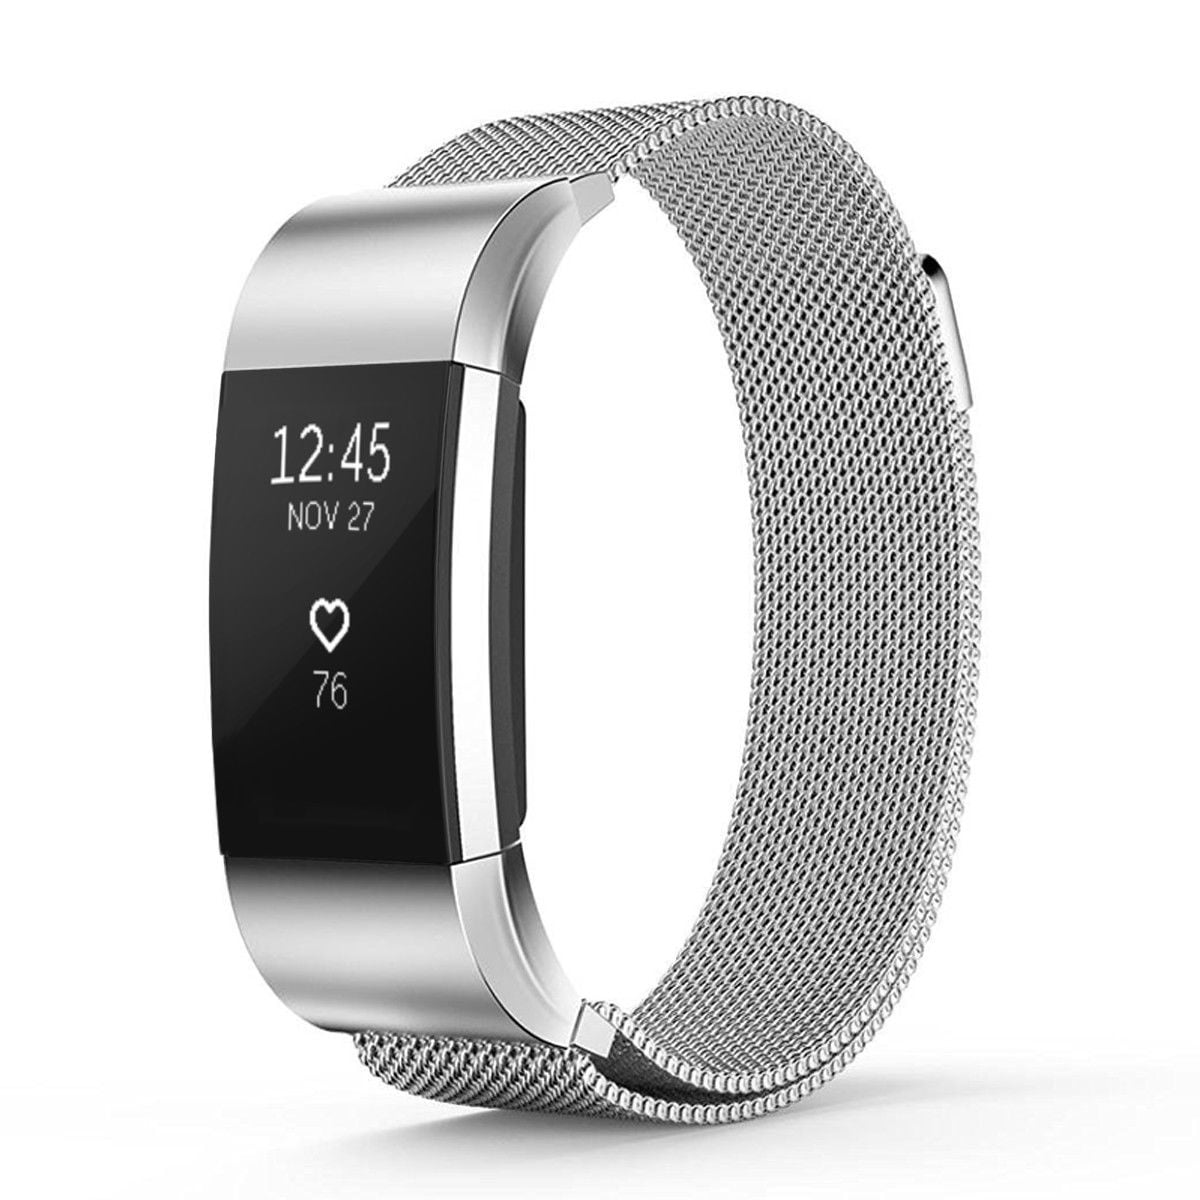 Stainless Steel Magnetic Milanese Loop Wrist Strap Band For Fitbit Charge 2 